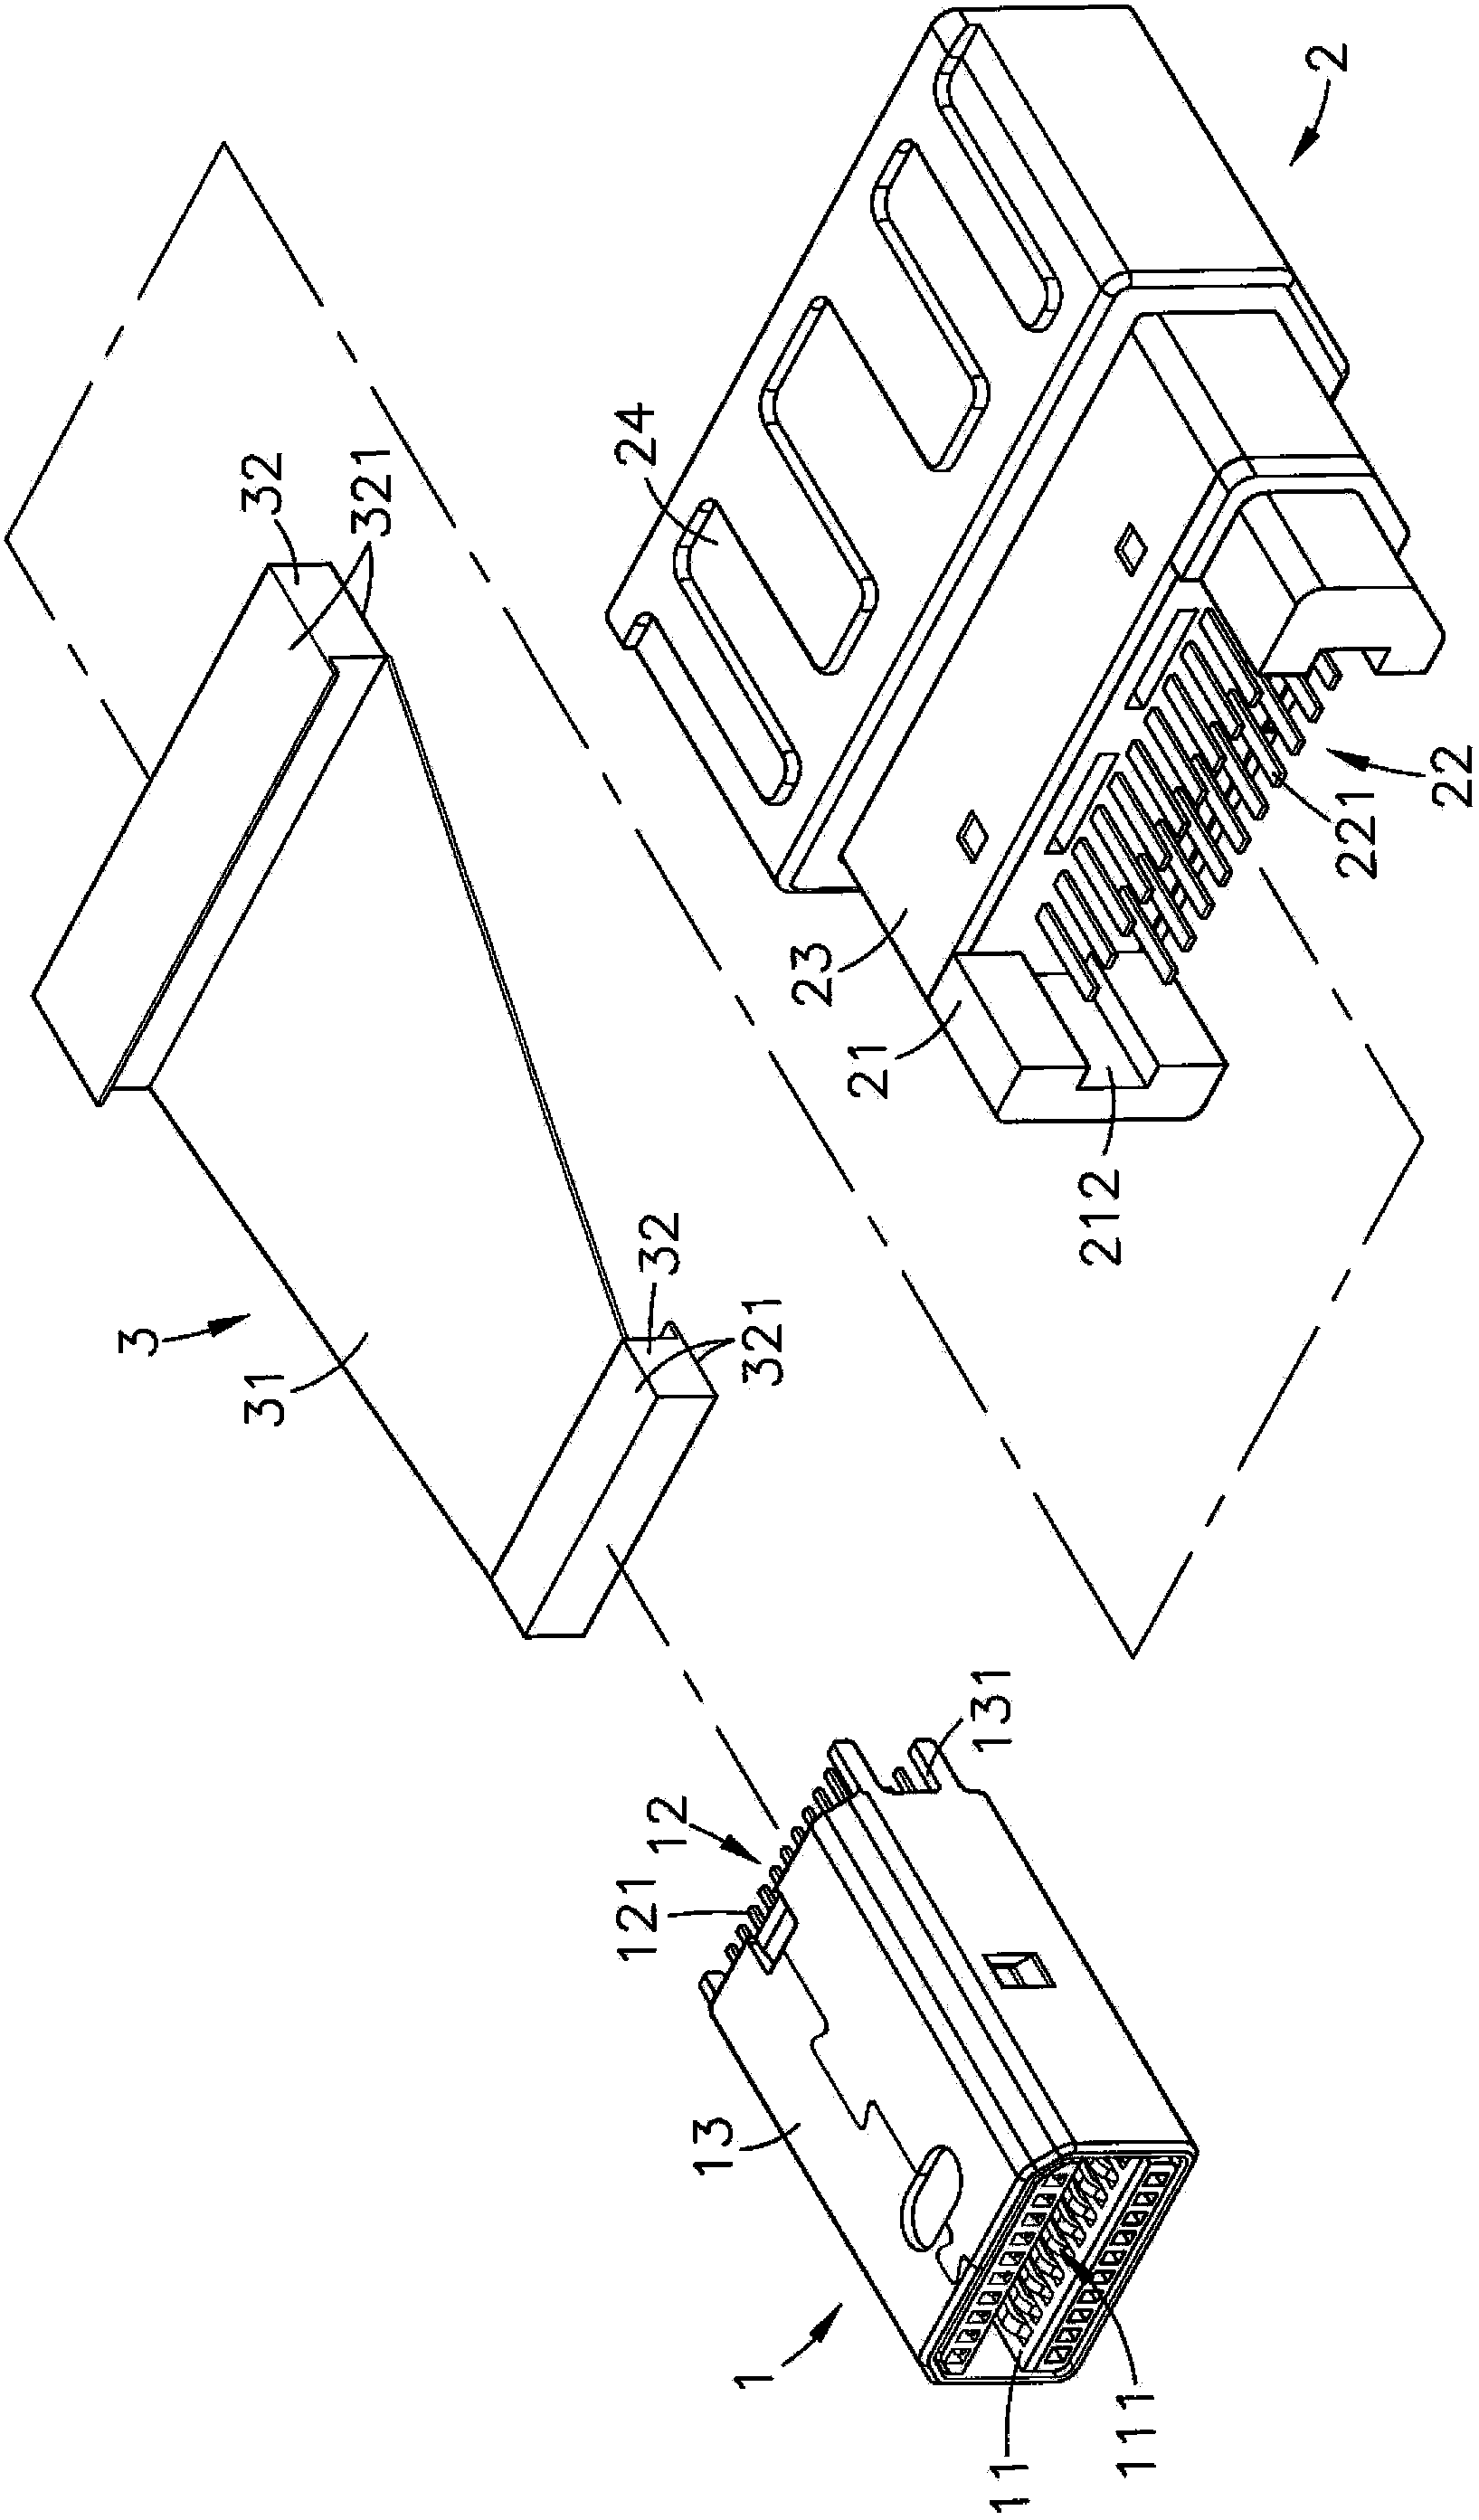 Manufacturing method for applying soft and hard combined plate to adaptor connector